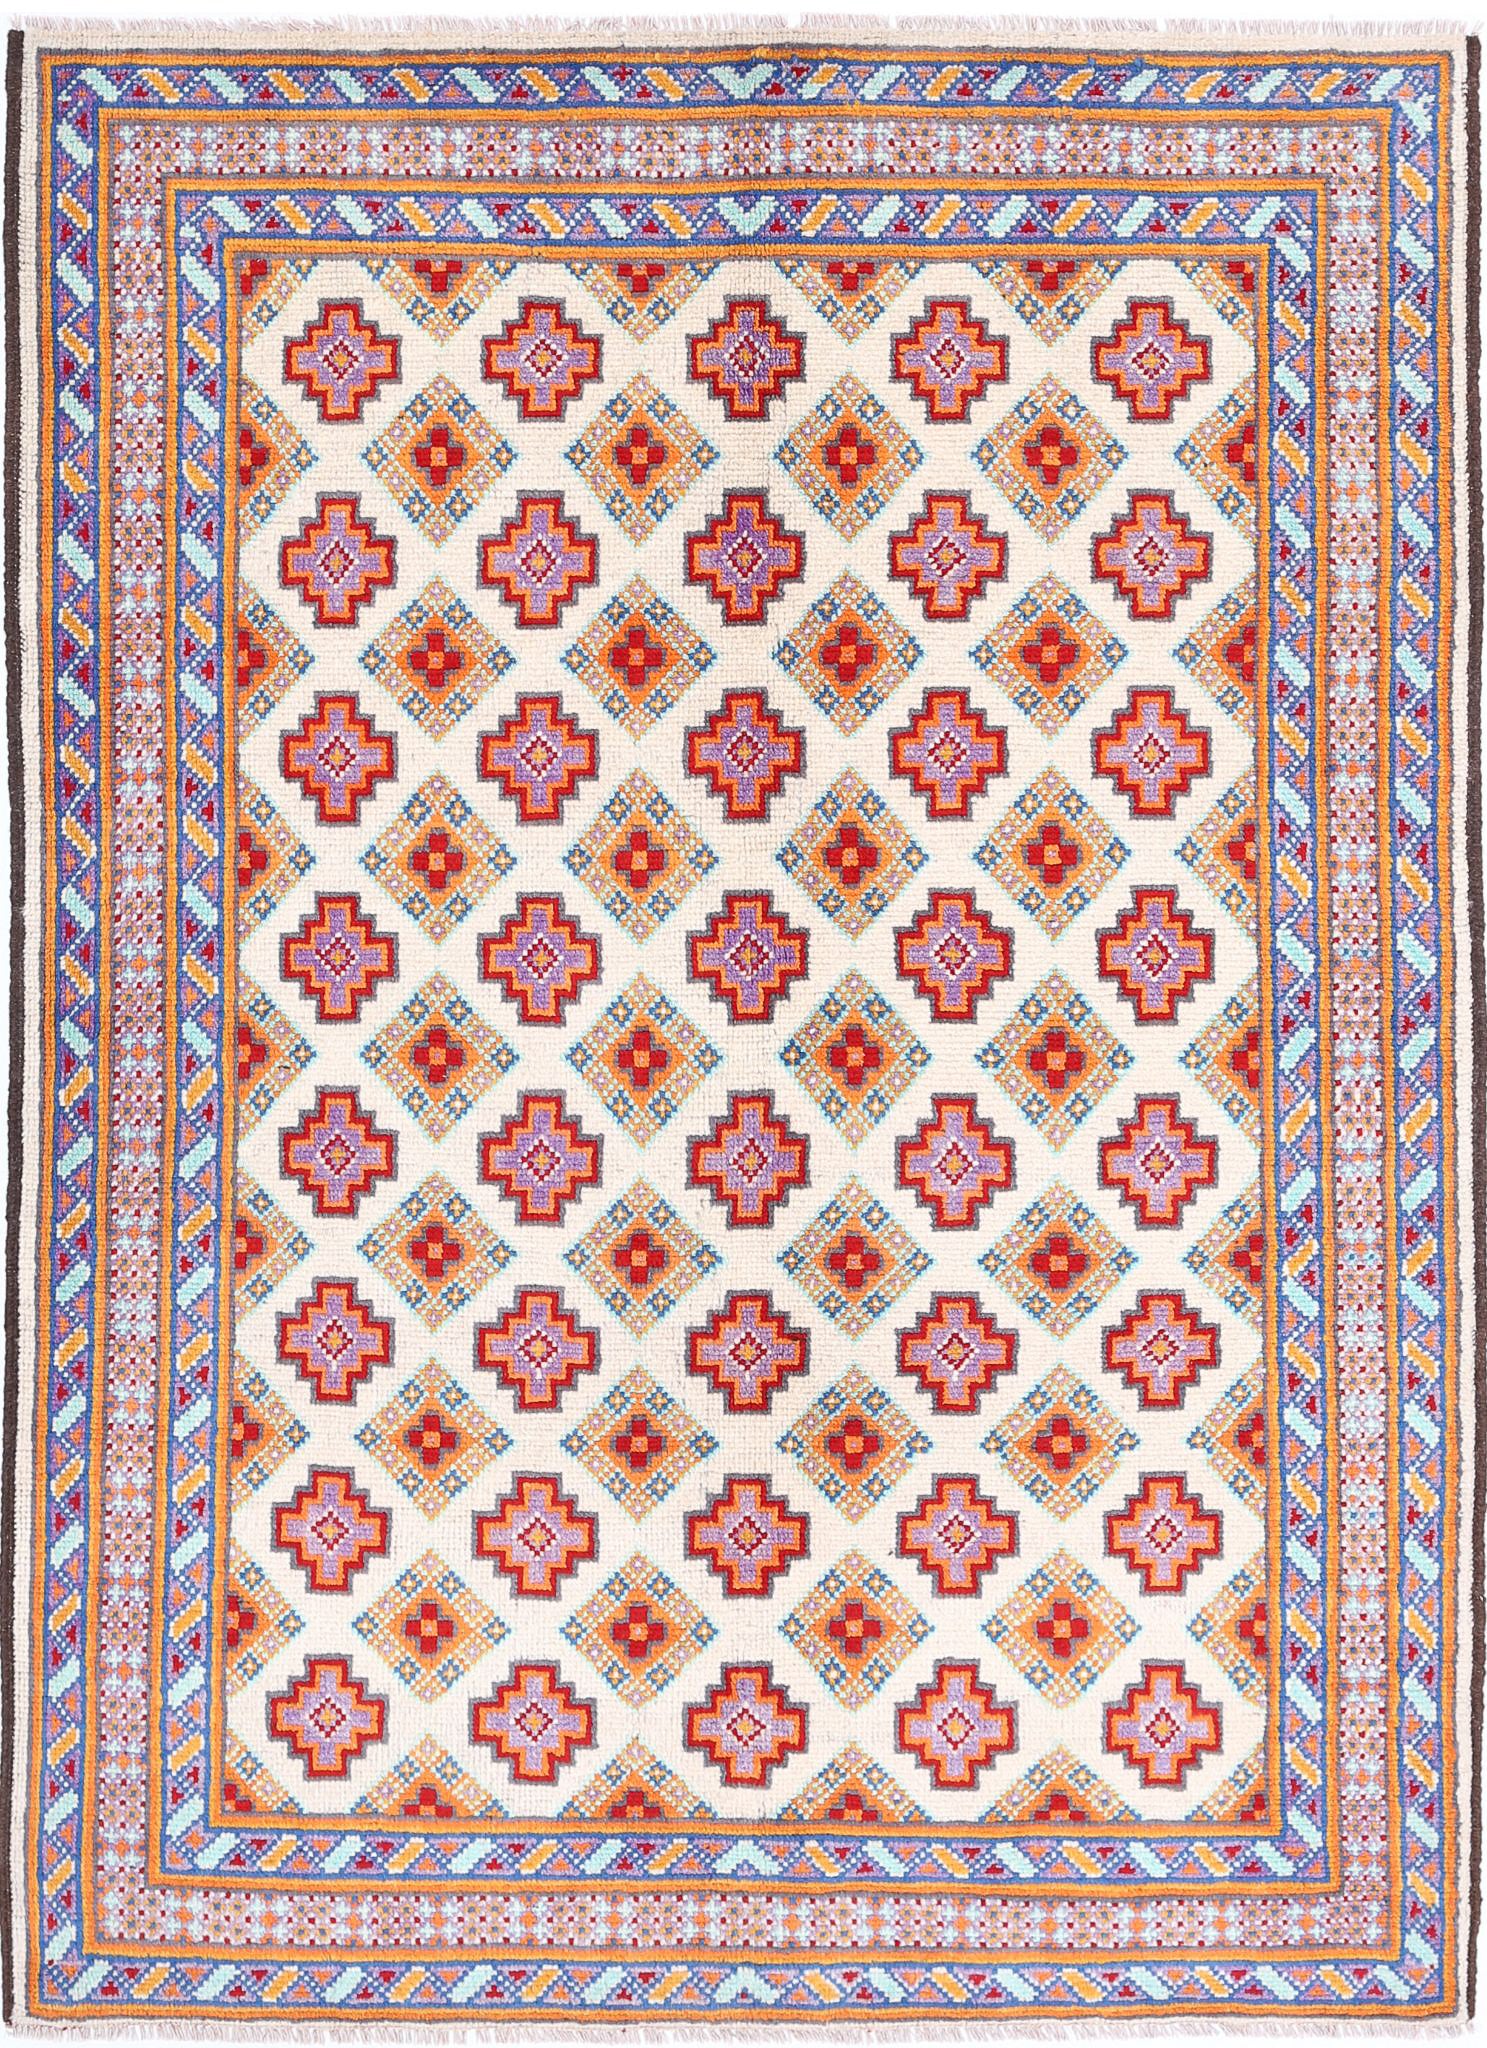 Revival-hand-knotted-qarghani-wool-rug-5014072.jpg